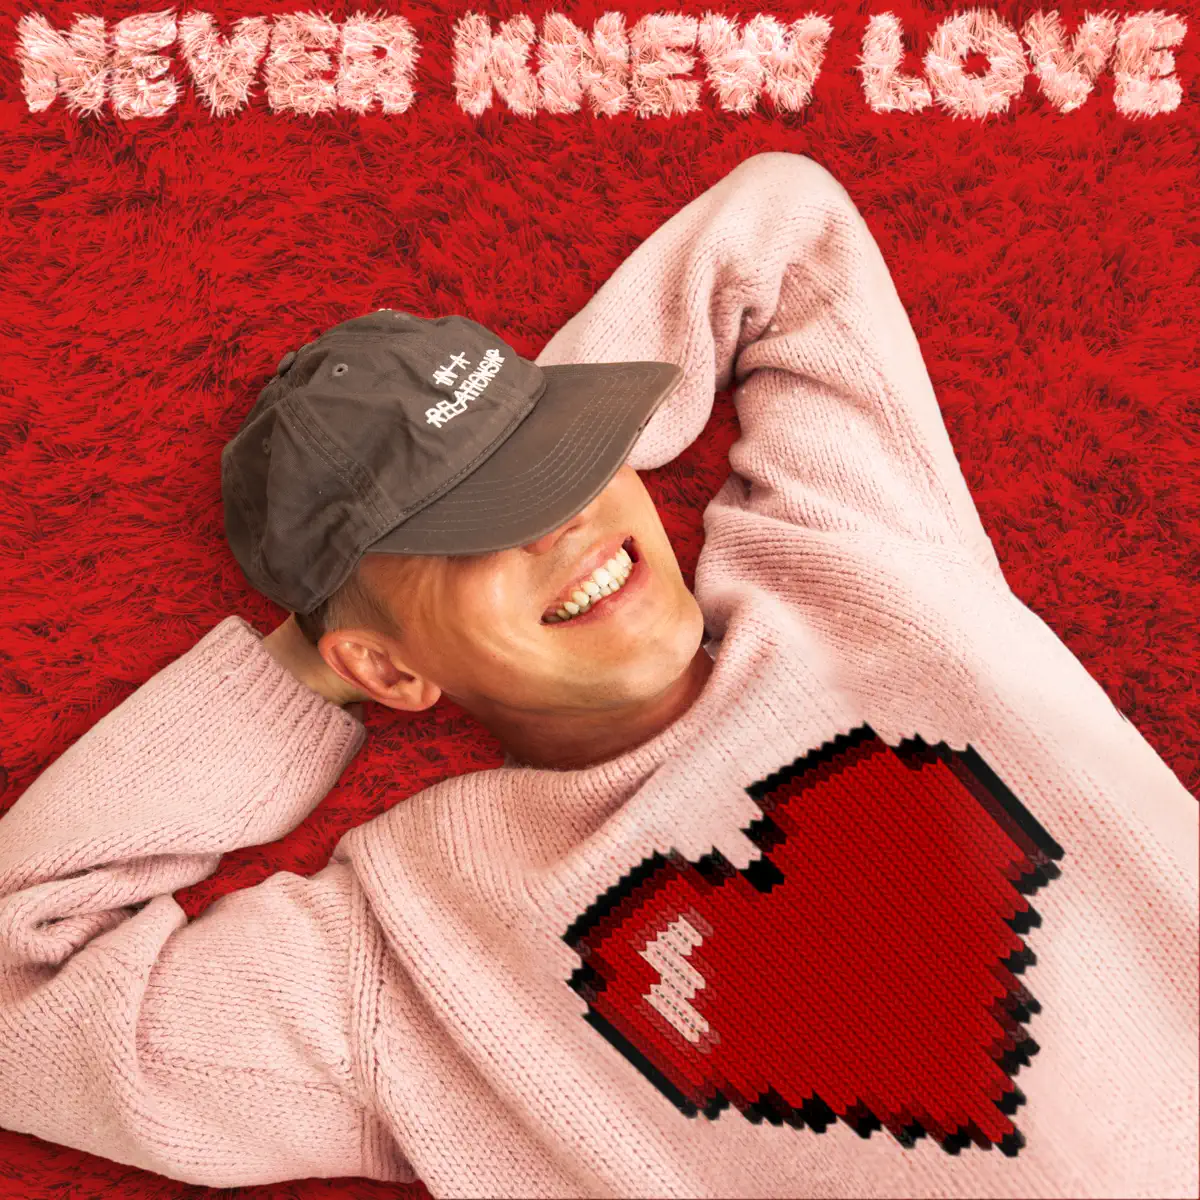 Riton & Belters Only - Never Knew Love (feat. Enisa) - Single (2023) [iTunes Plus AAC M4A]-新房子